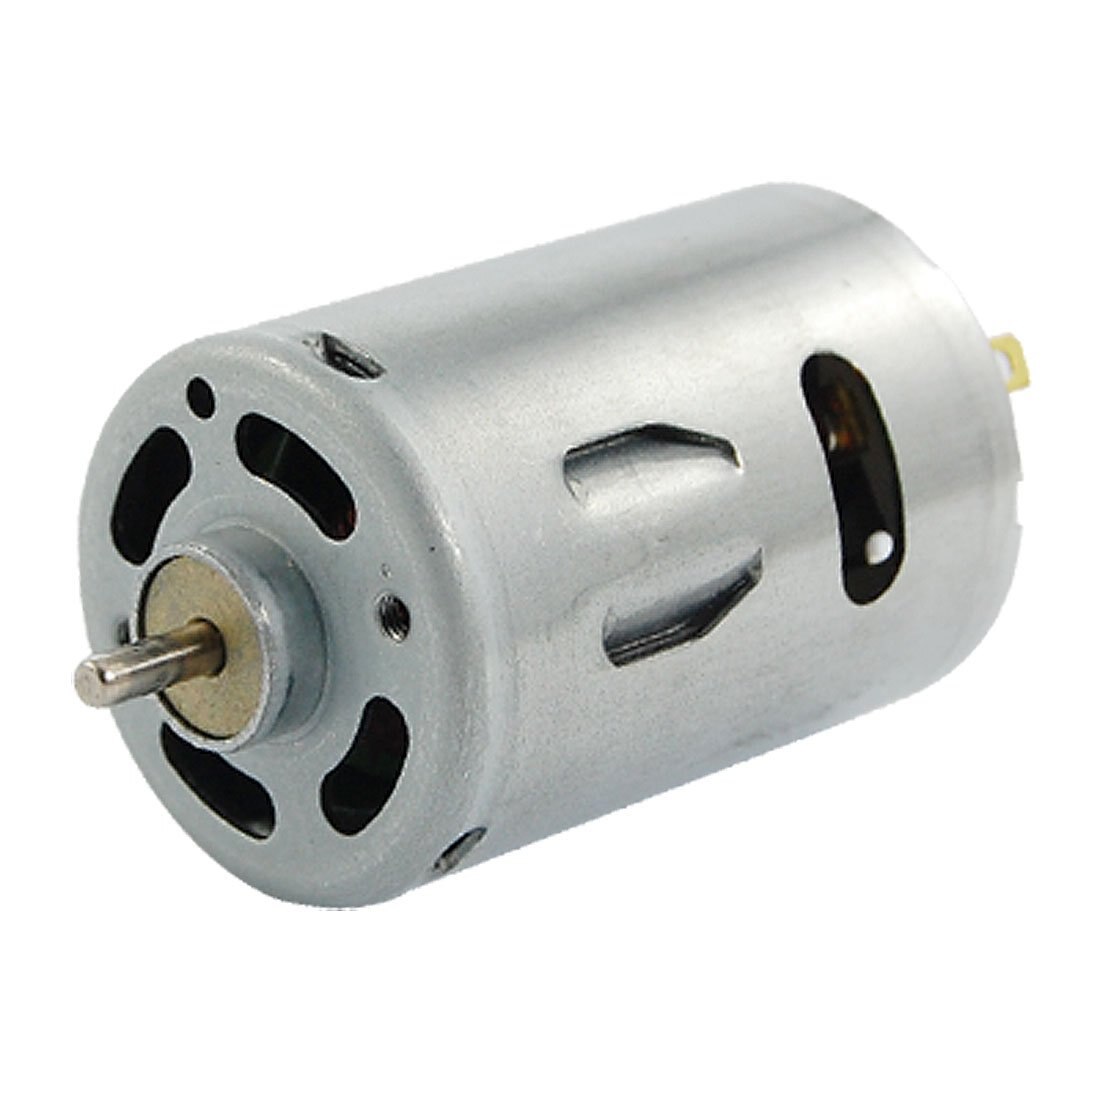  ڵ DIY Ʈ   EWS 12V 2A 20000RPM  DC ̴ /EWS 12V 2A 20000RPM Powerful DC Mini Motor for Electric Cars DIY Project